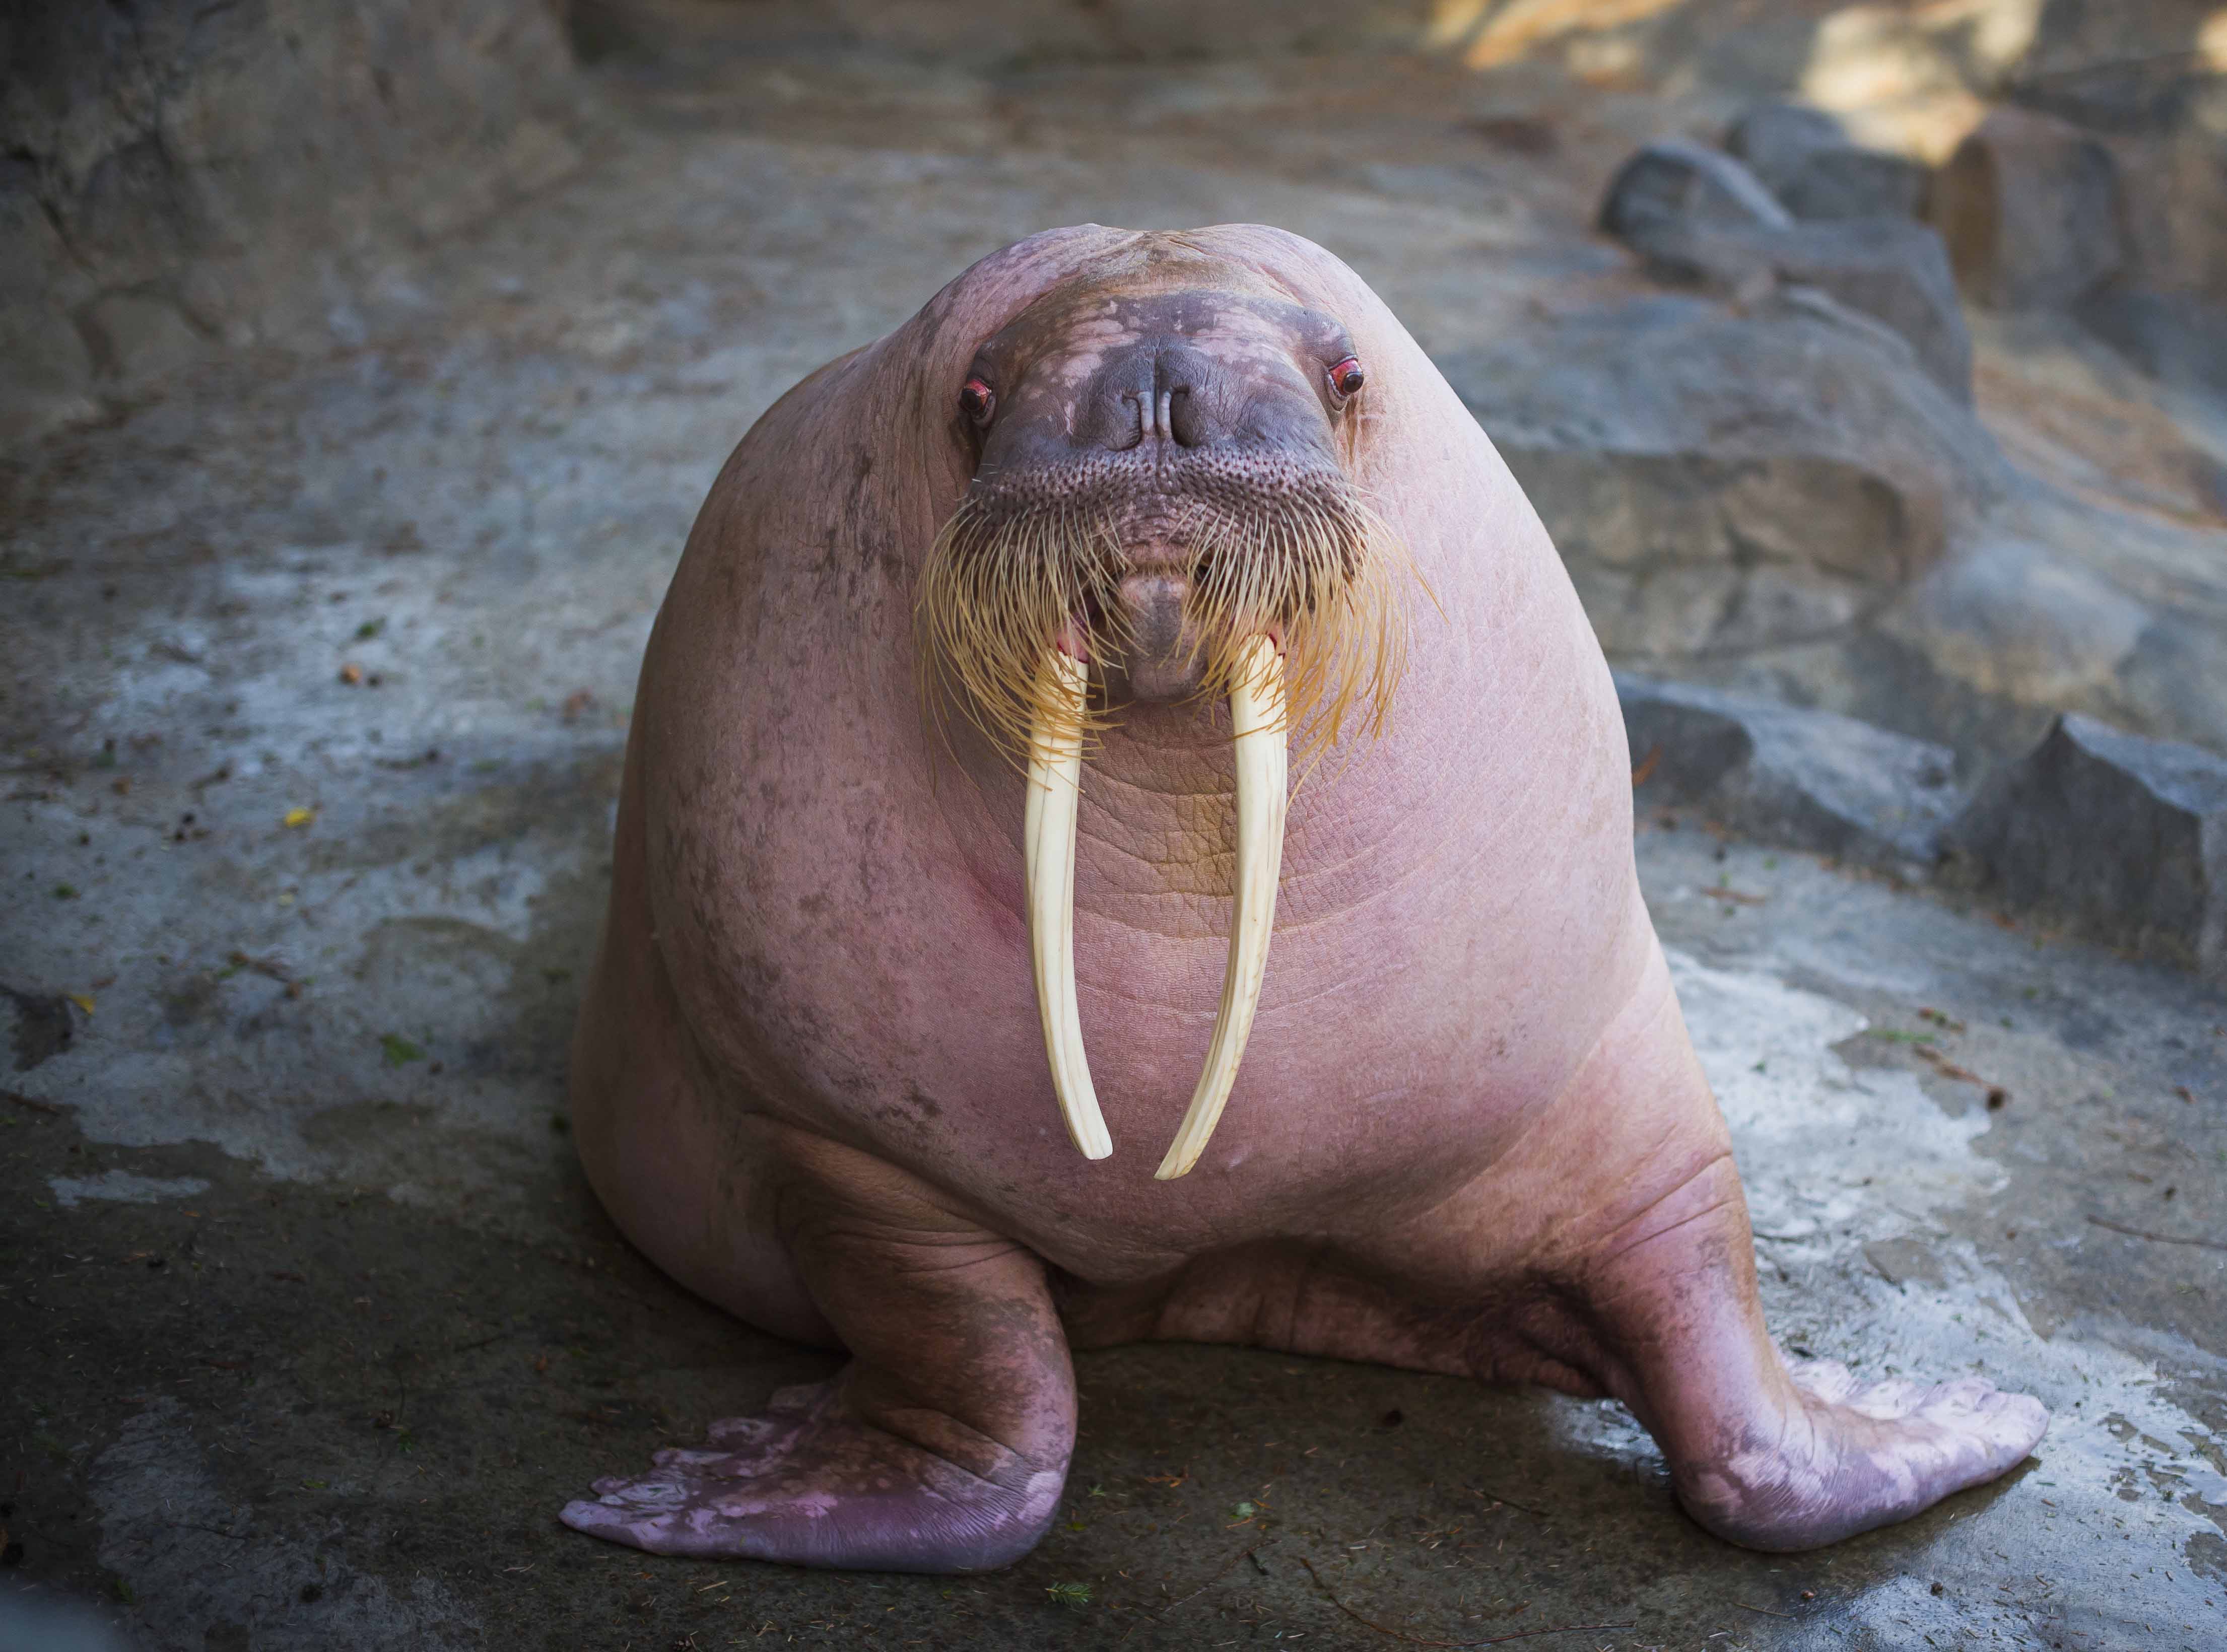 Dozer is back to charm the walrus ladies at Point Defiance Zoo & Aquarium